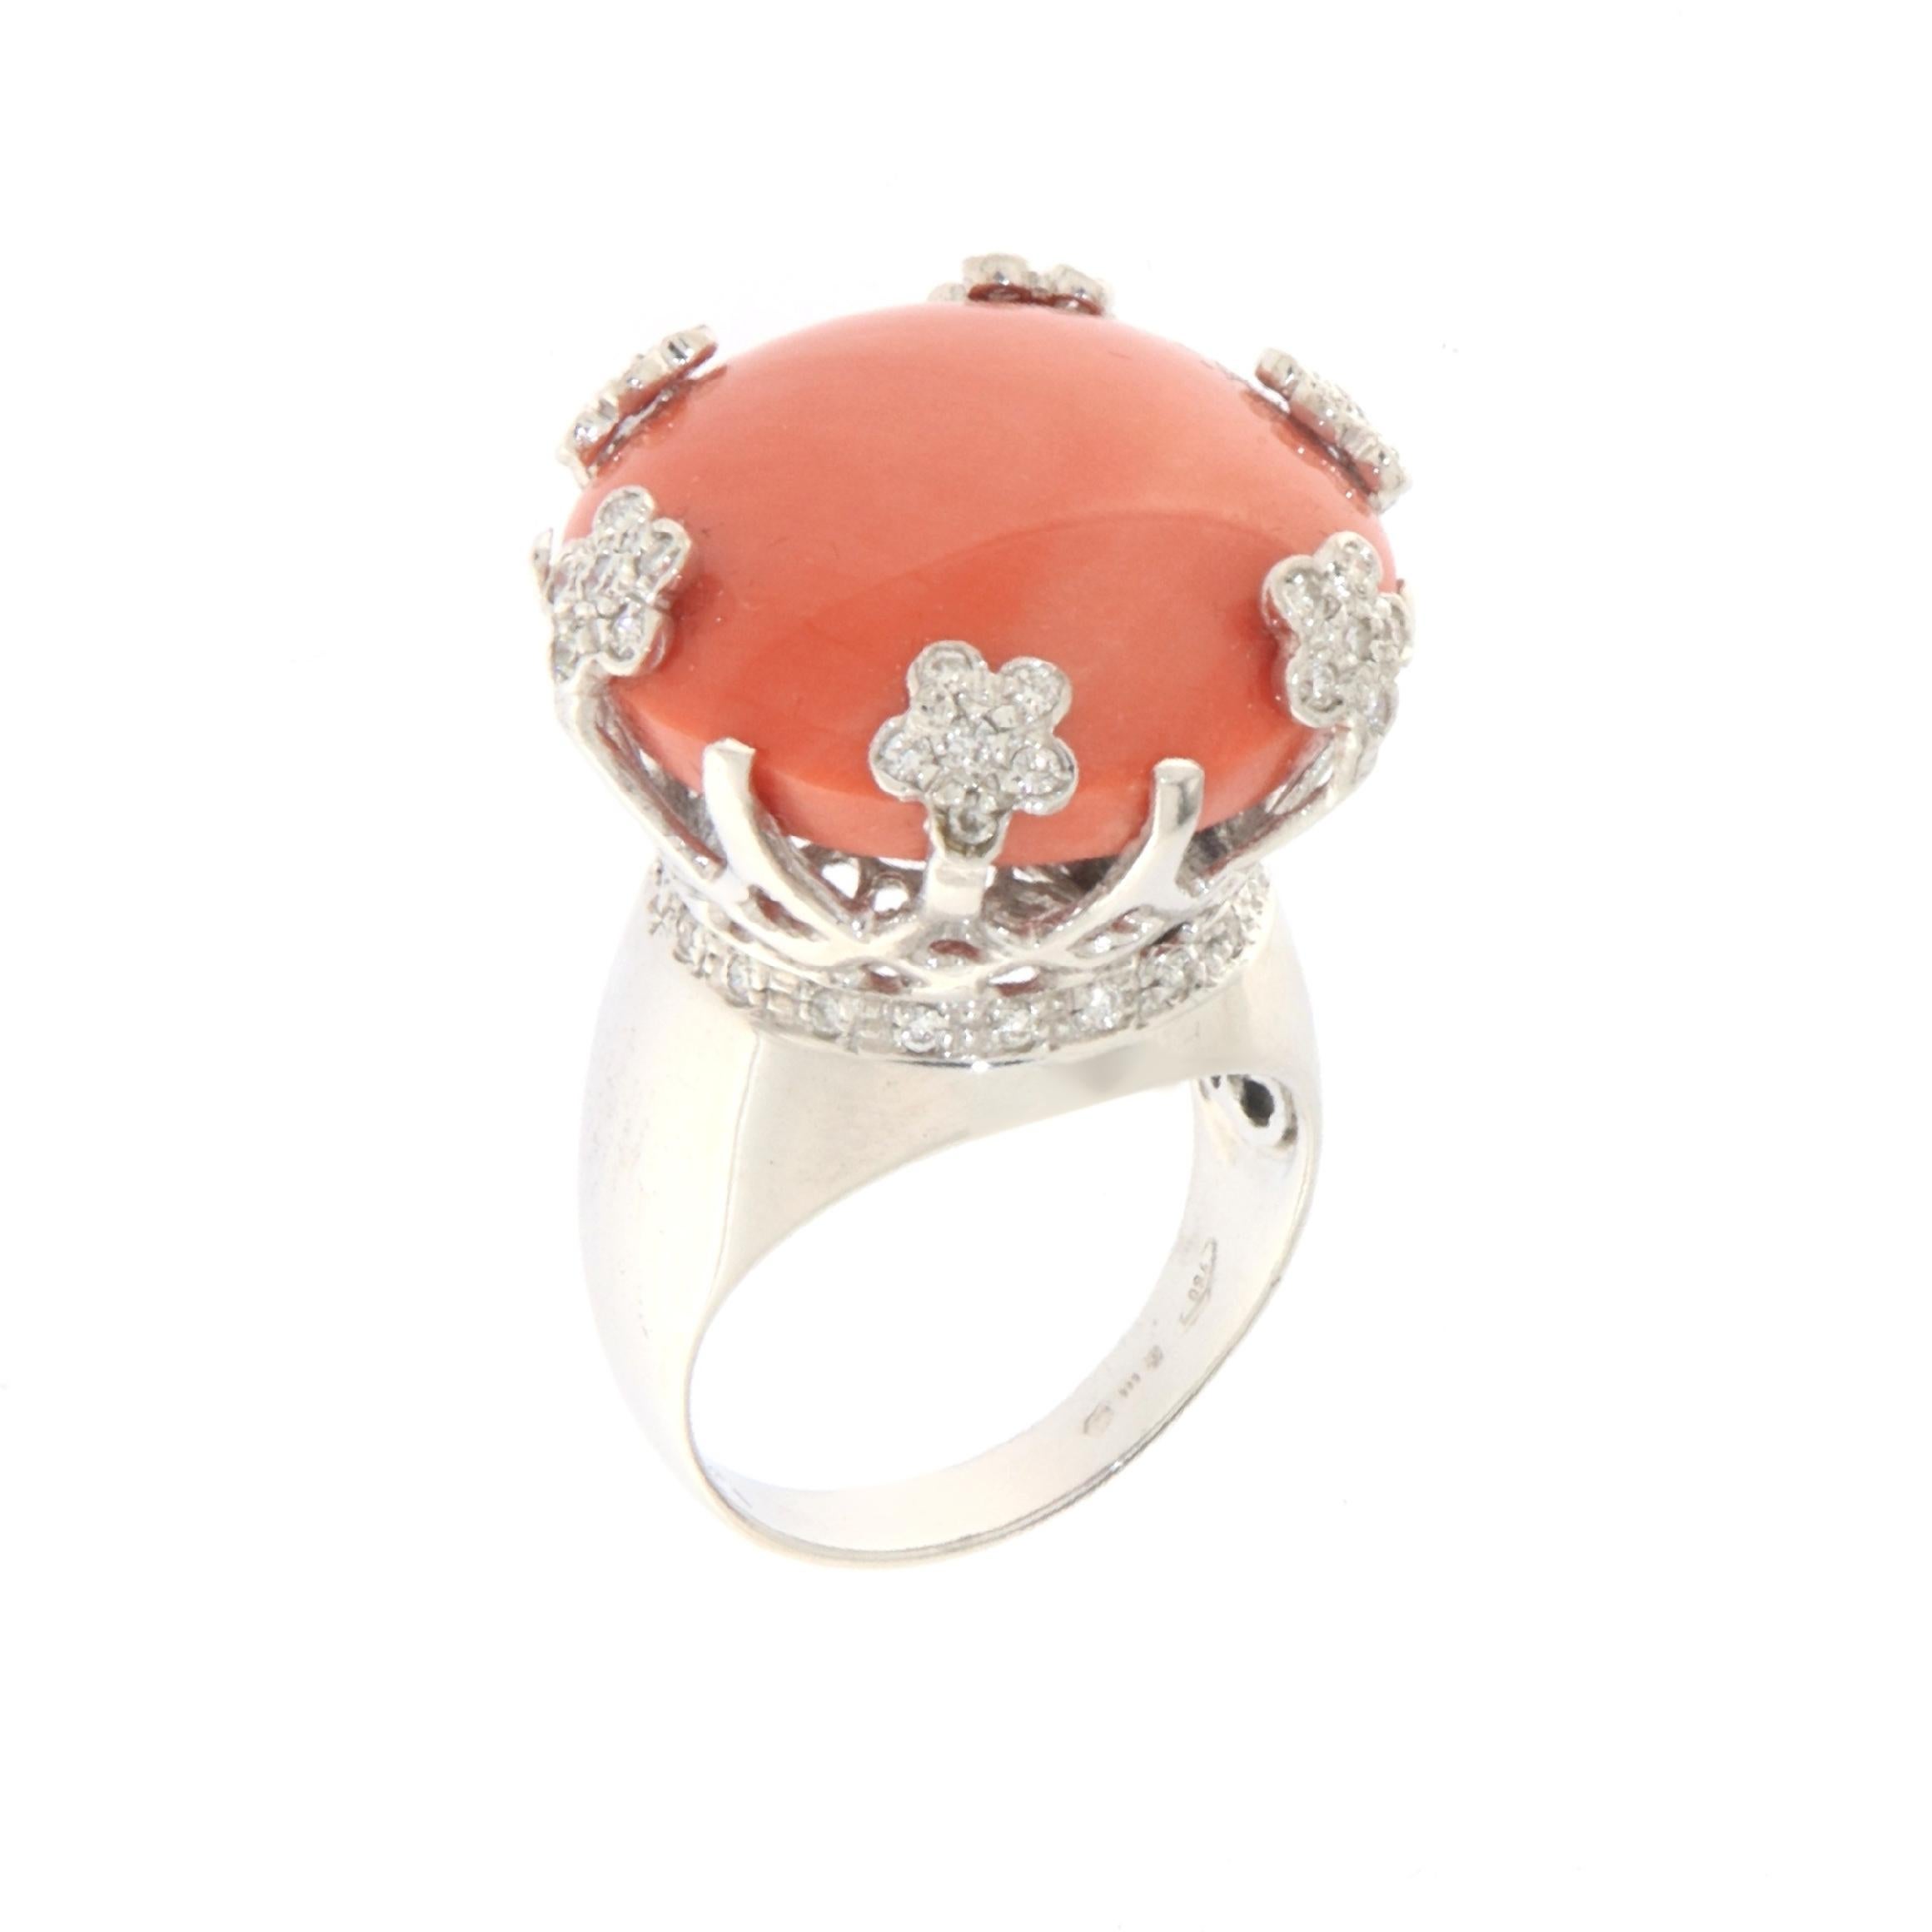 This elegant ring in 18-karat white gold is a sublime example of craftsmanship and refined material selection. At its center, lies a natural coral button, whose delicate and sophisticated shade stands apart from the usual fiery red, evoking the